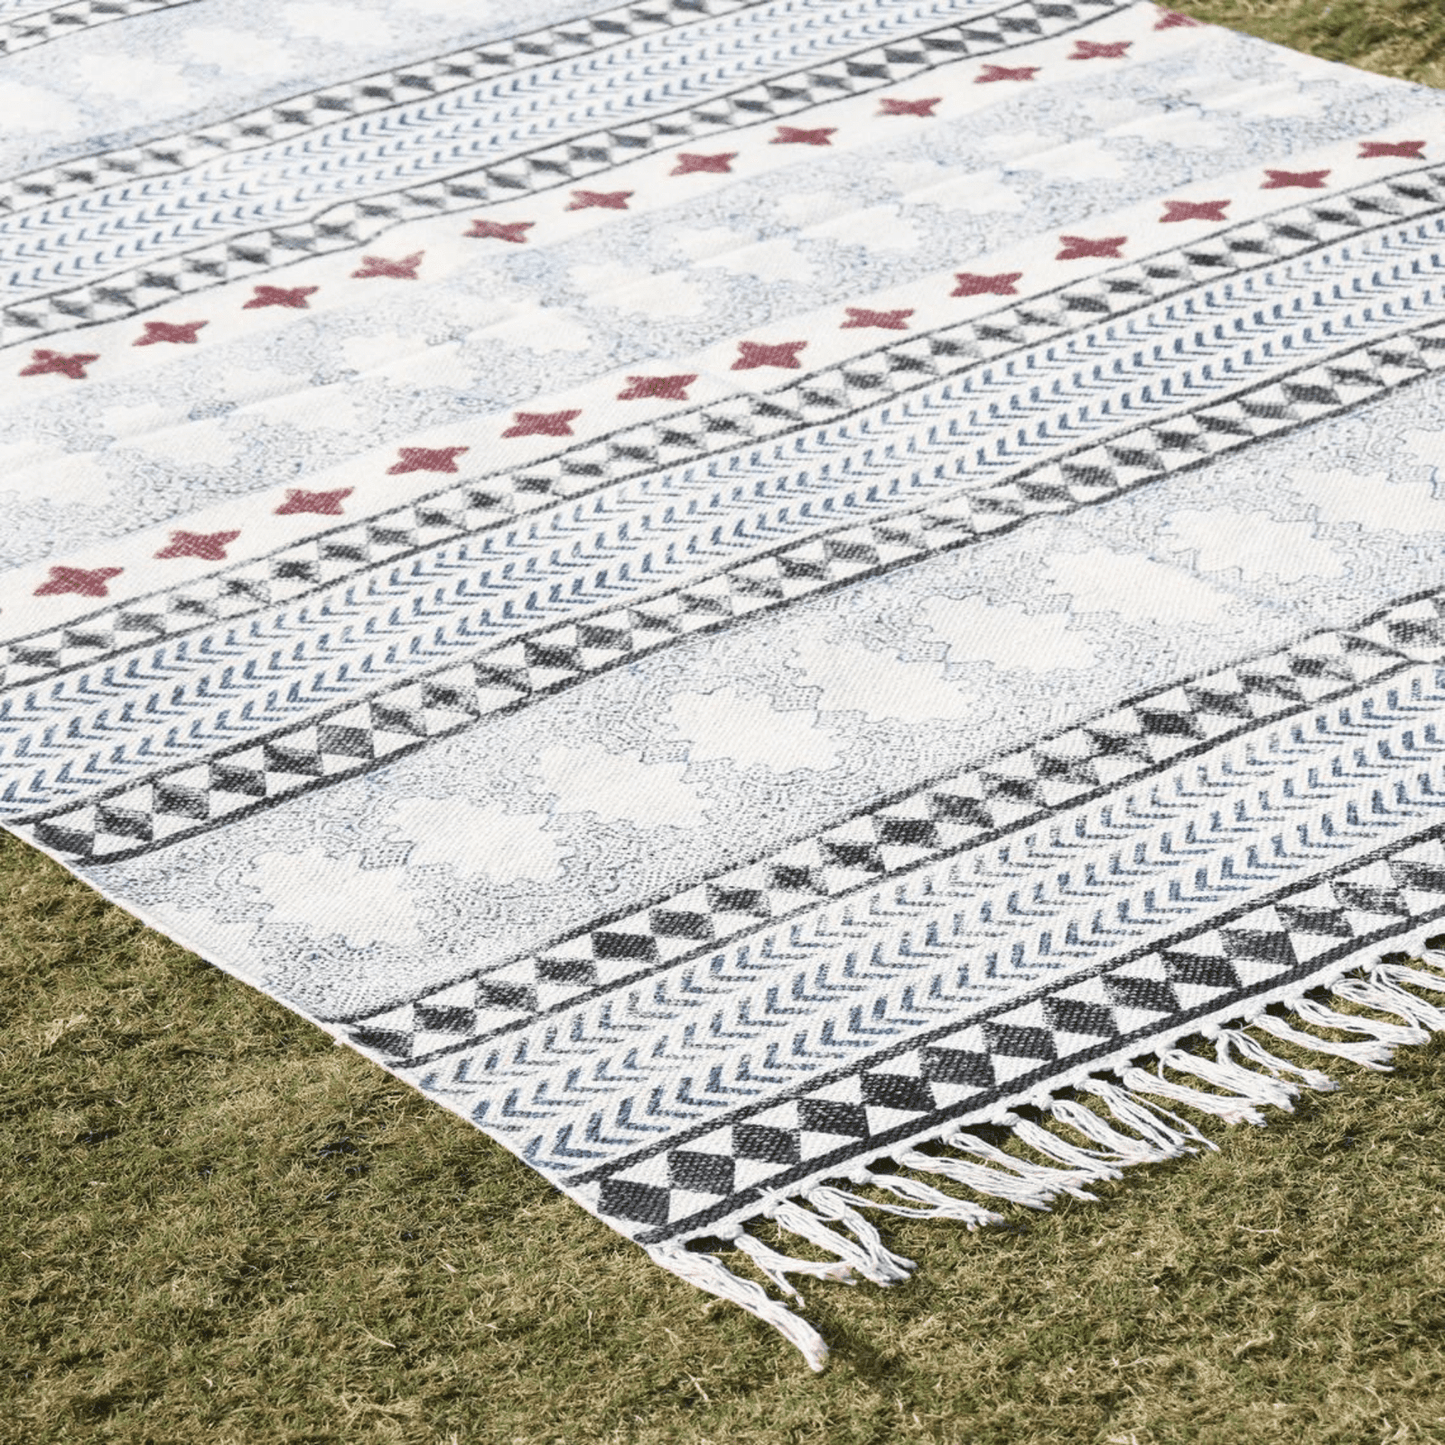 Buy Cotton Indoor Outdoor Rugs Black and White Large Available in 3x5 , 4x6 , 5x7 , 8x10 feet